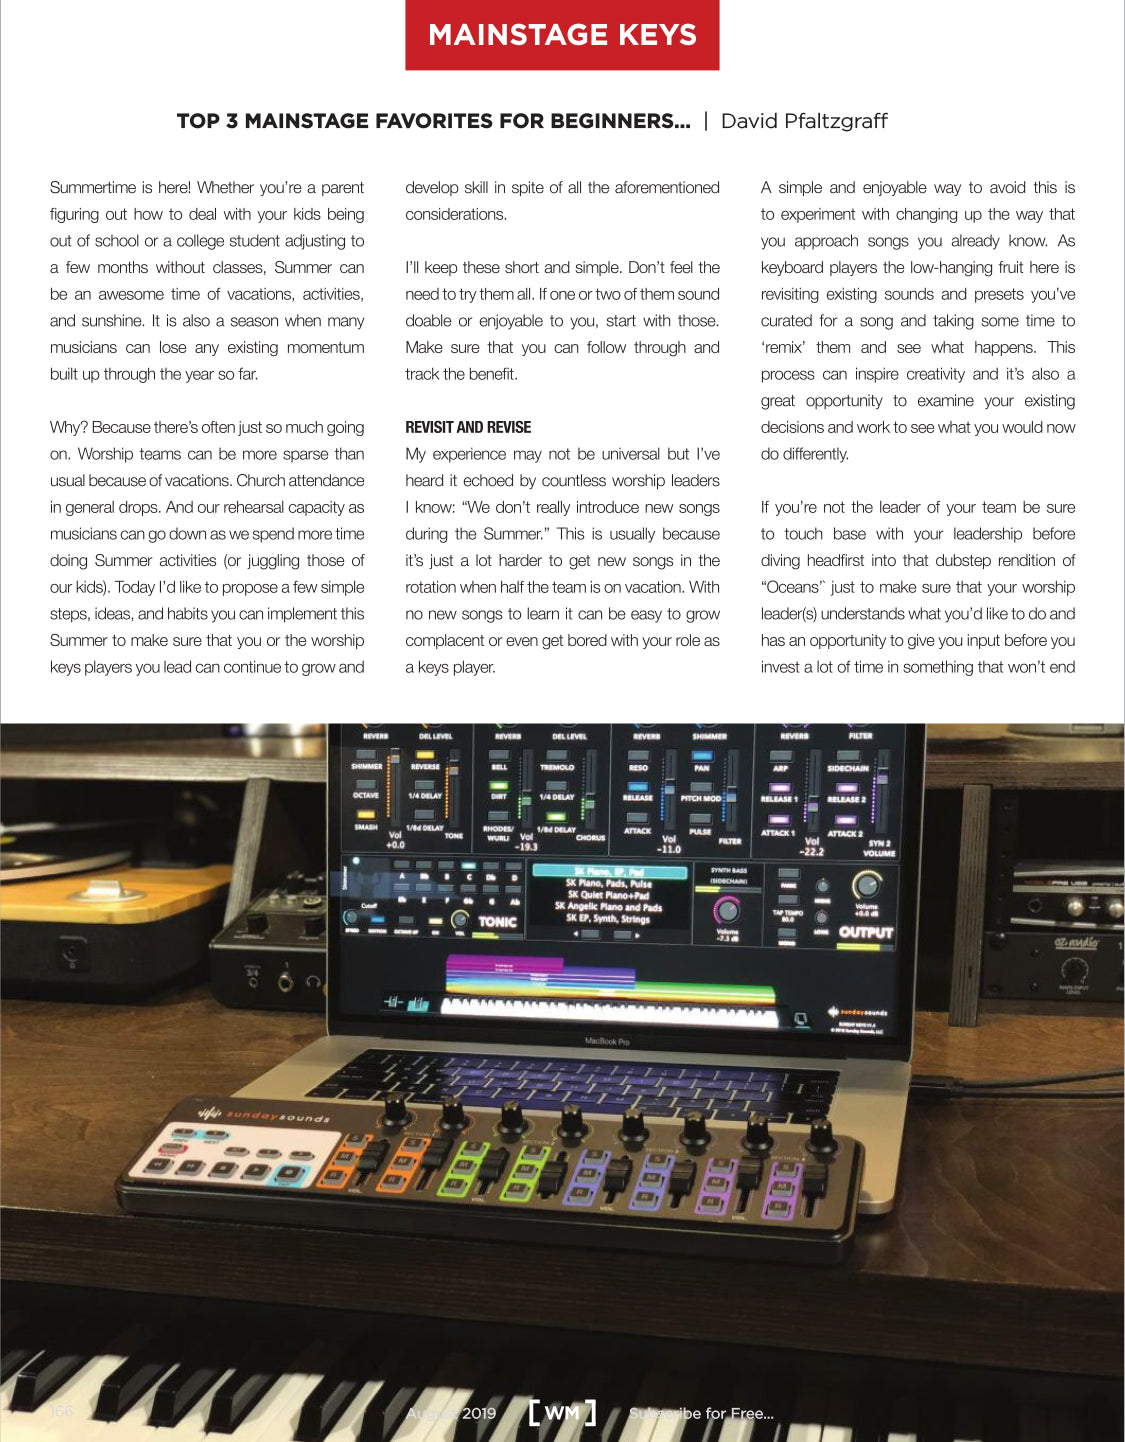 Top 3 MainStage Favorites for Beginners: Worship Musician Mag August 2019!